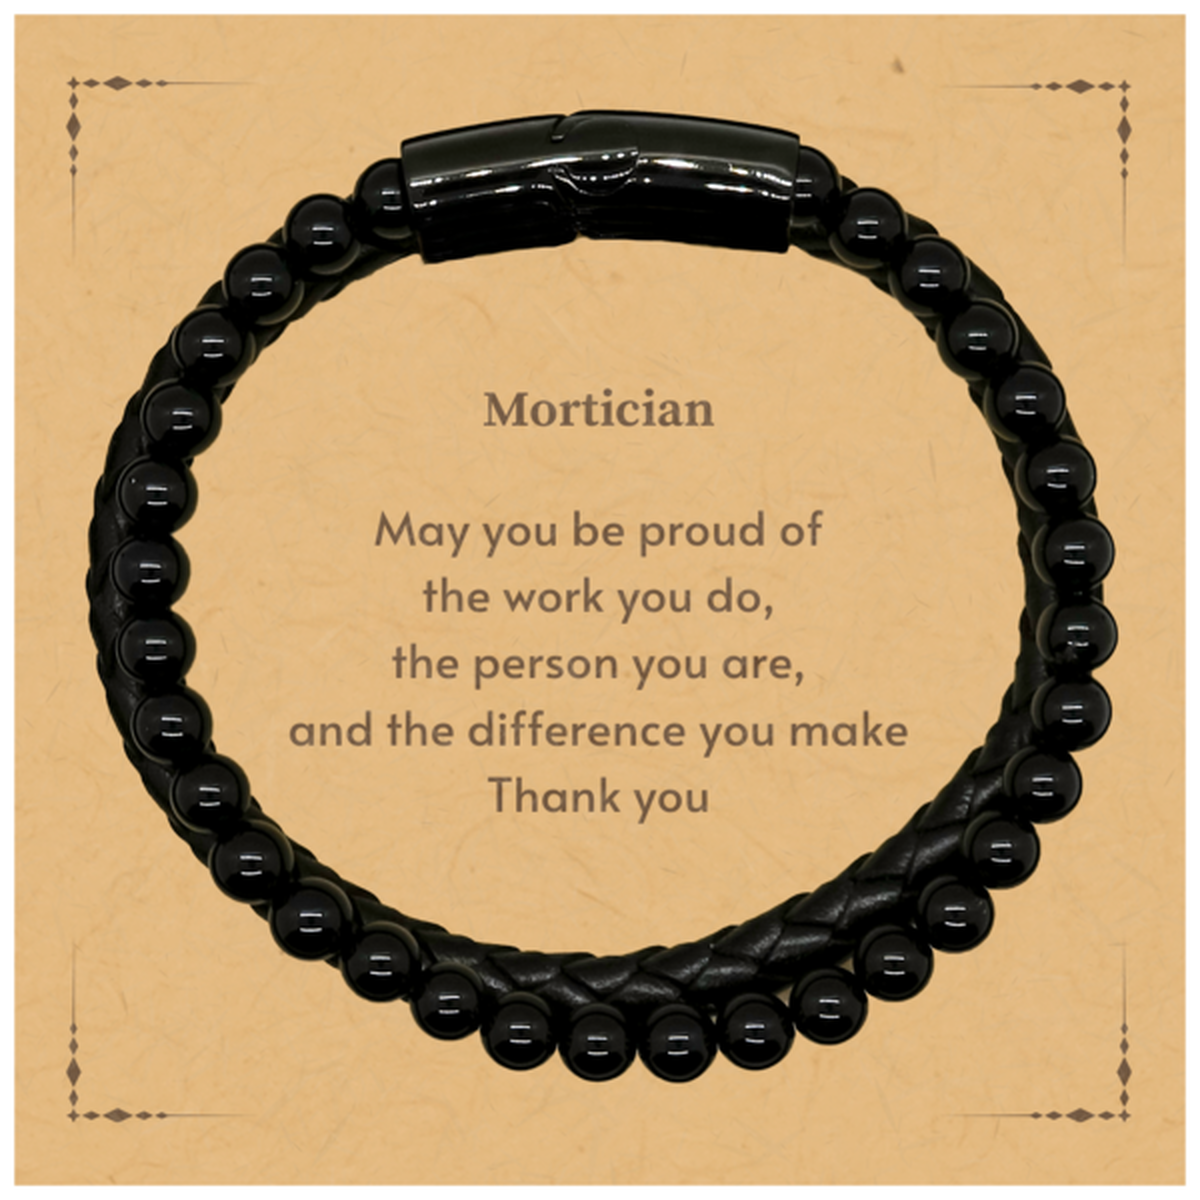 Heartwarming Stone Leather Bracelets Retirement Coworkers Gifts for Mortician, Mortician May You be proud of the work you do, the person you are Gifts for Boss Men Women Friends